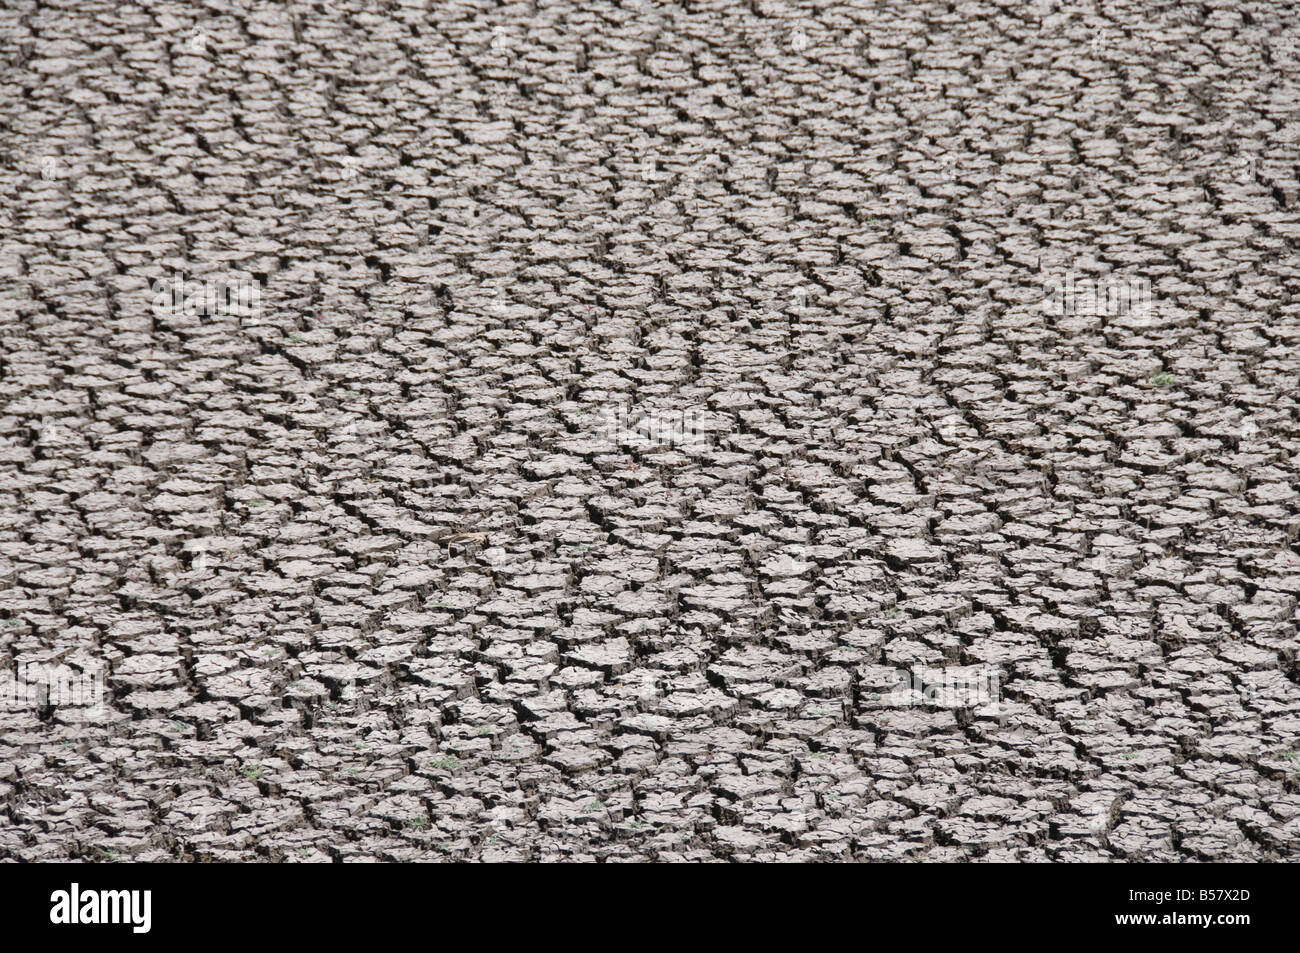 Cracked river bed in drought, Mexico, North America Stock Photo